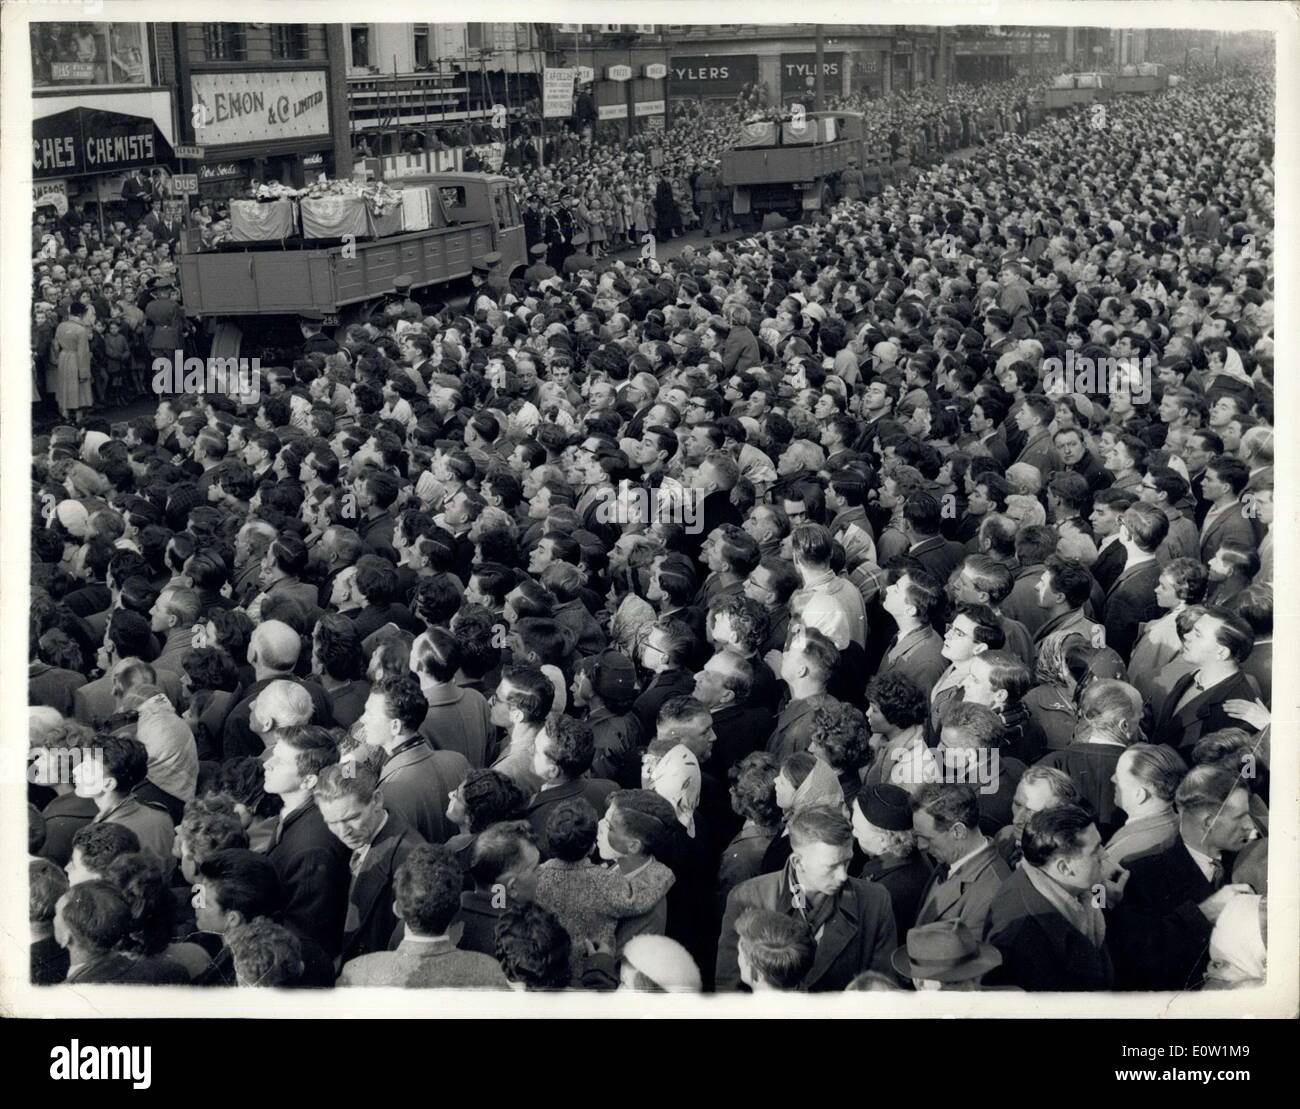 Nov. 24, 1960 - Funeral of Irish soldiers killes in Congo: The nine Irish soldiers who were by rebel tribesmen in the Congo earlier this month were buried with military honours in Glasnevin Cemetery, Dublin. Photo shows A vast crowd stands bareheaded during the funeral procession in Dublin on Tuesday Stock Photo